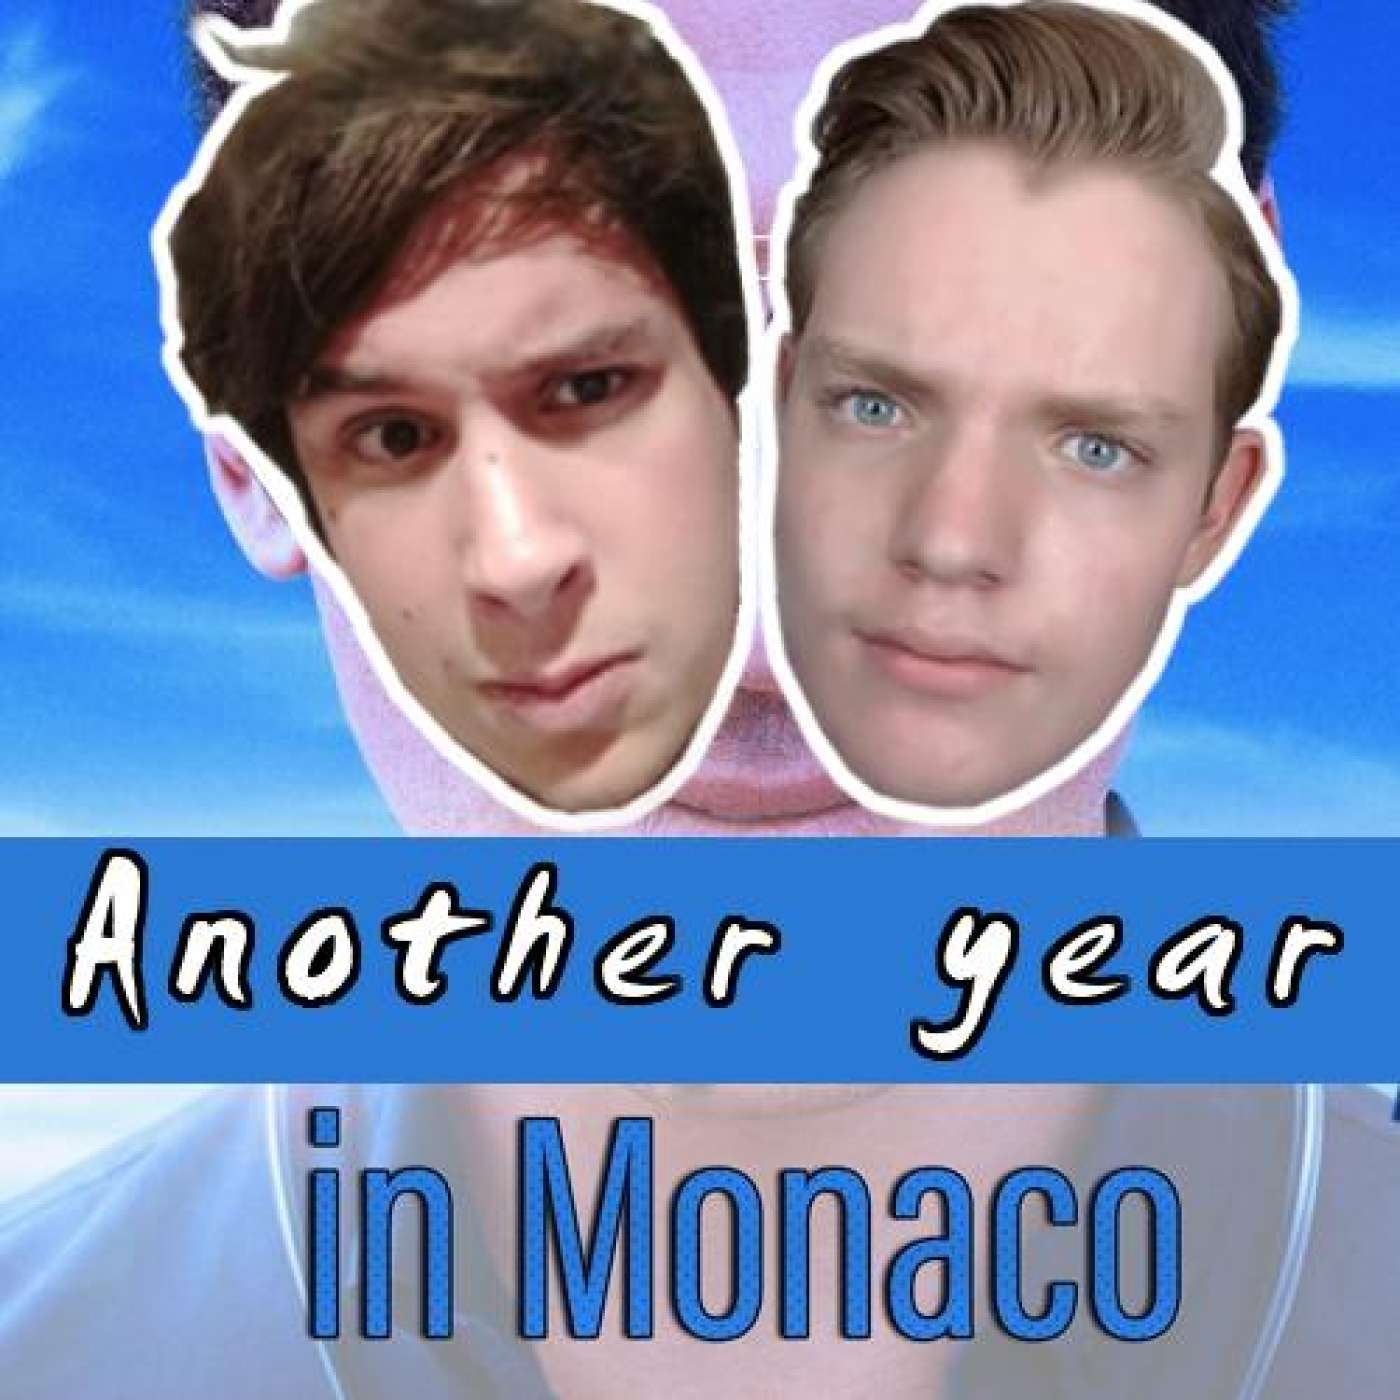 Another year in Monaco